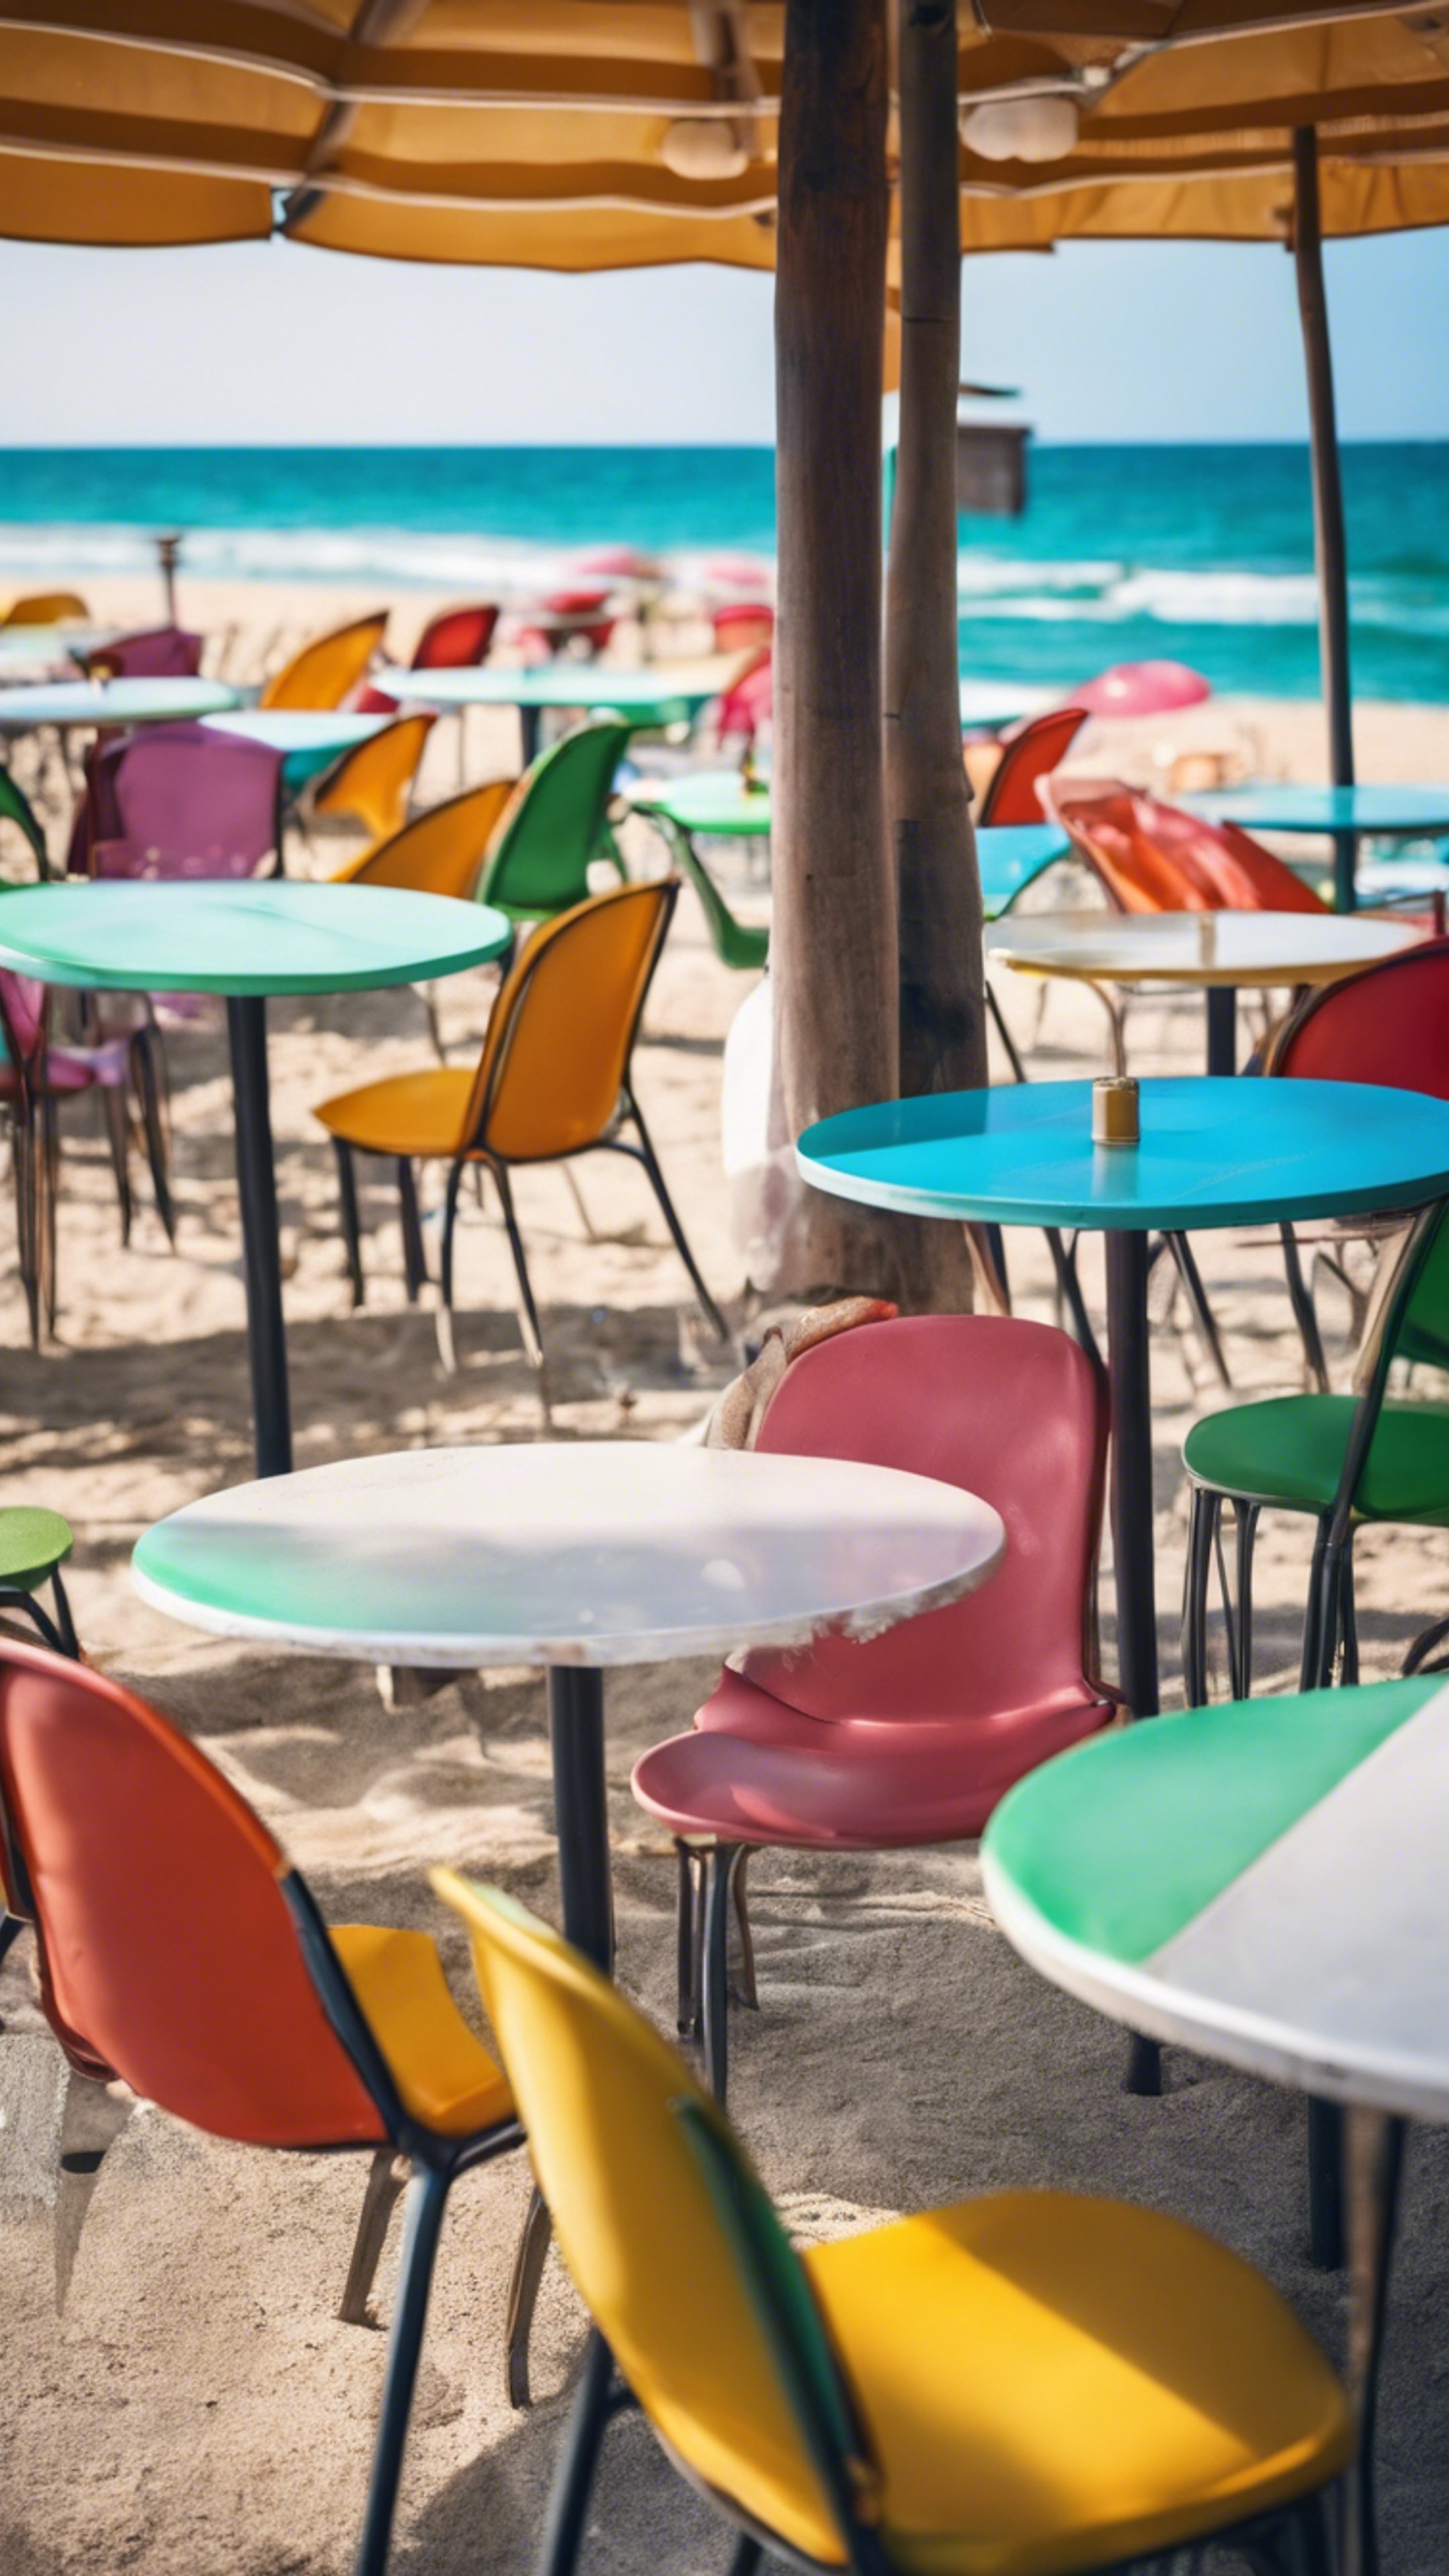 A beach side cafe with colorful chairs, umbrellas, and a panoramic view of the ocean. ورق الجدران[e8a344cbd52d49a3867e]